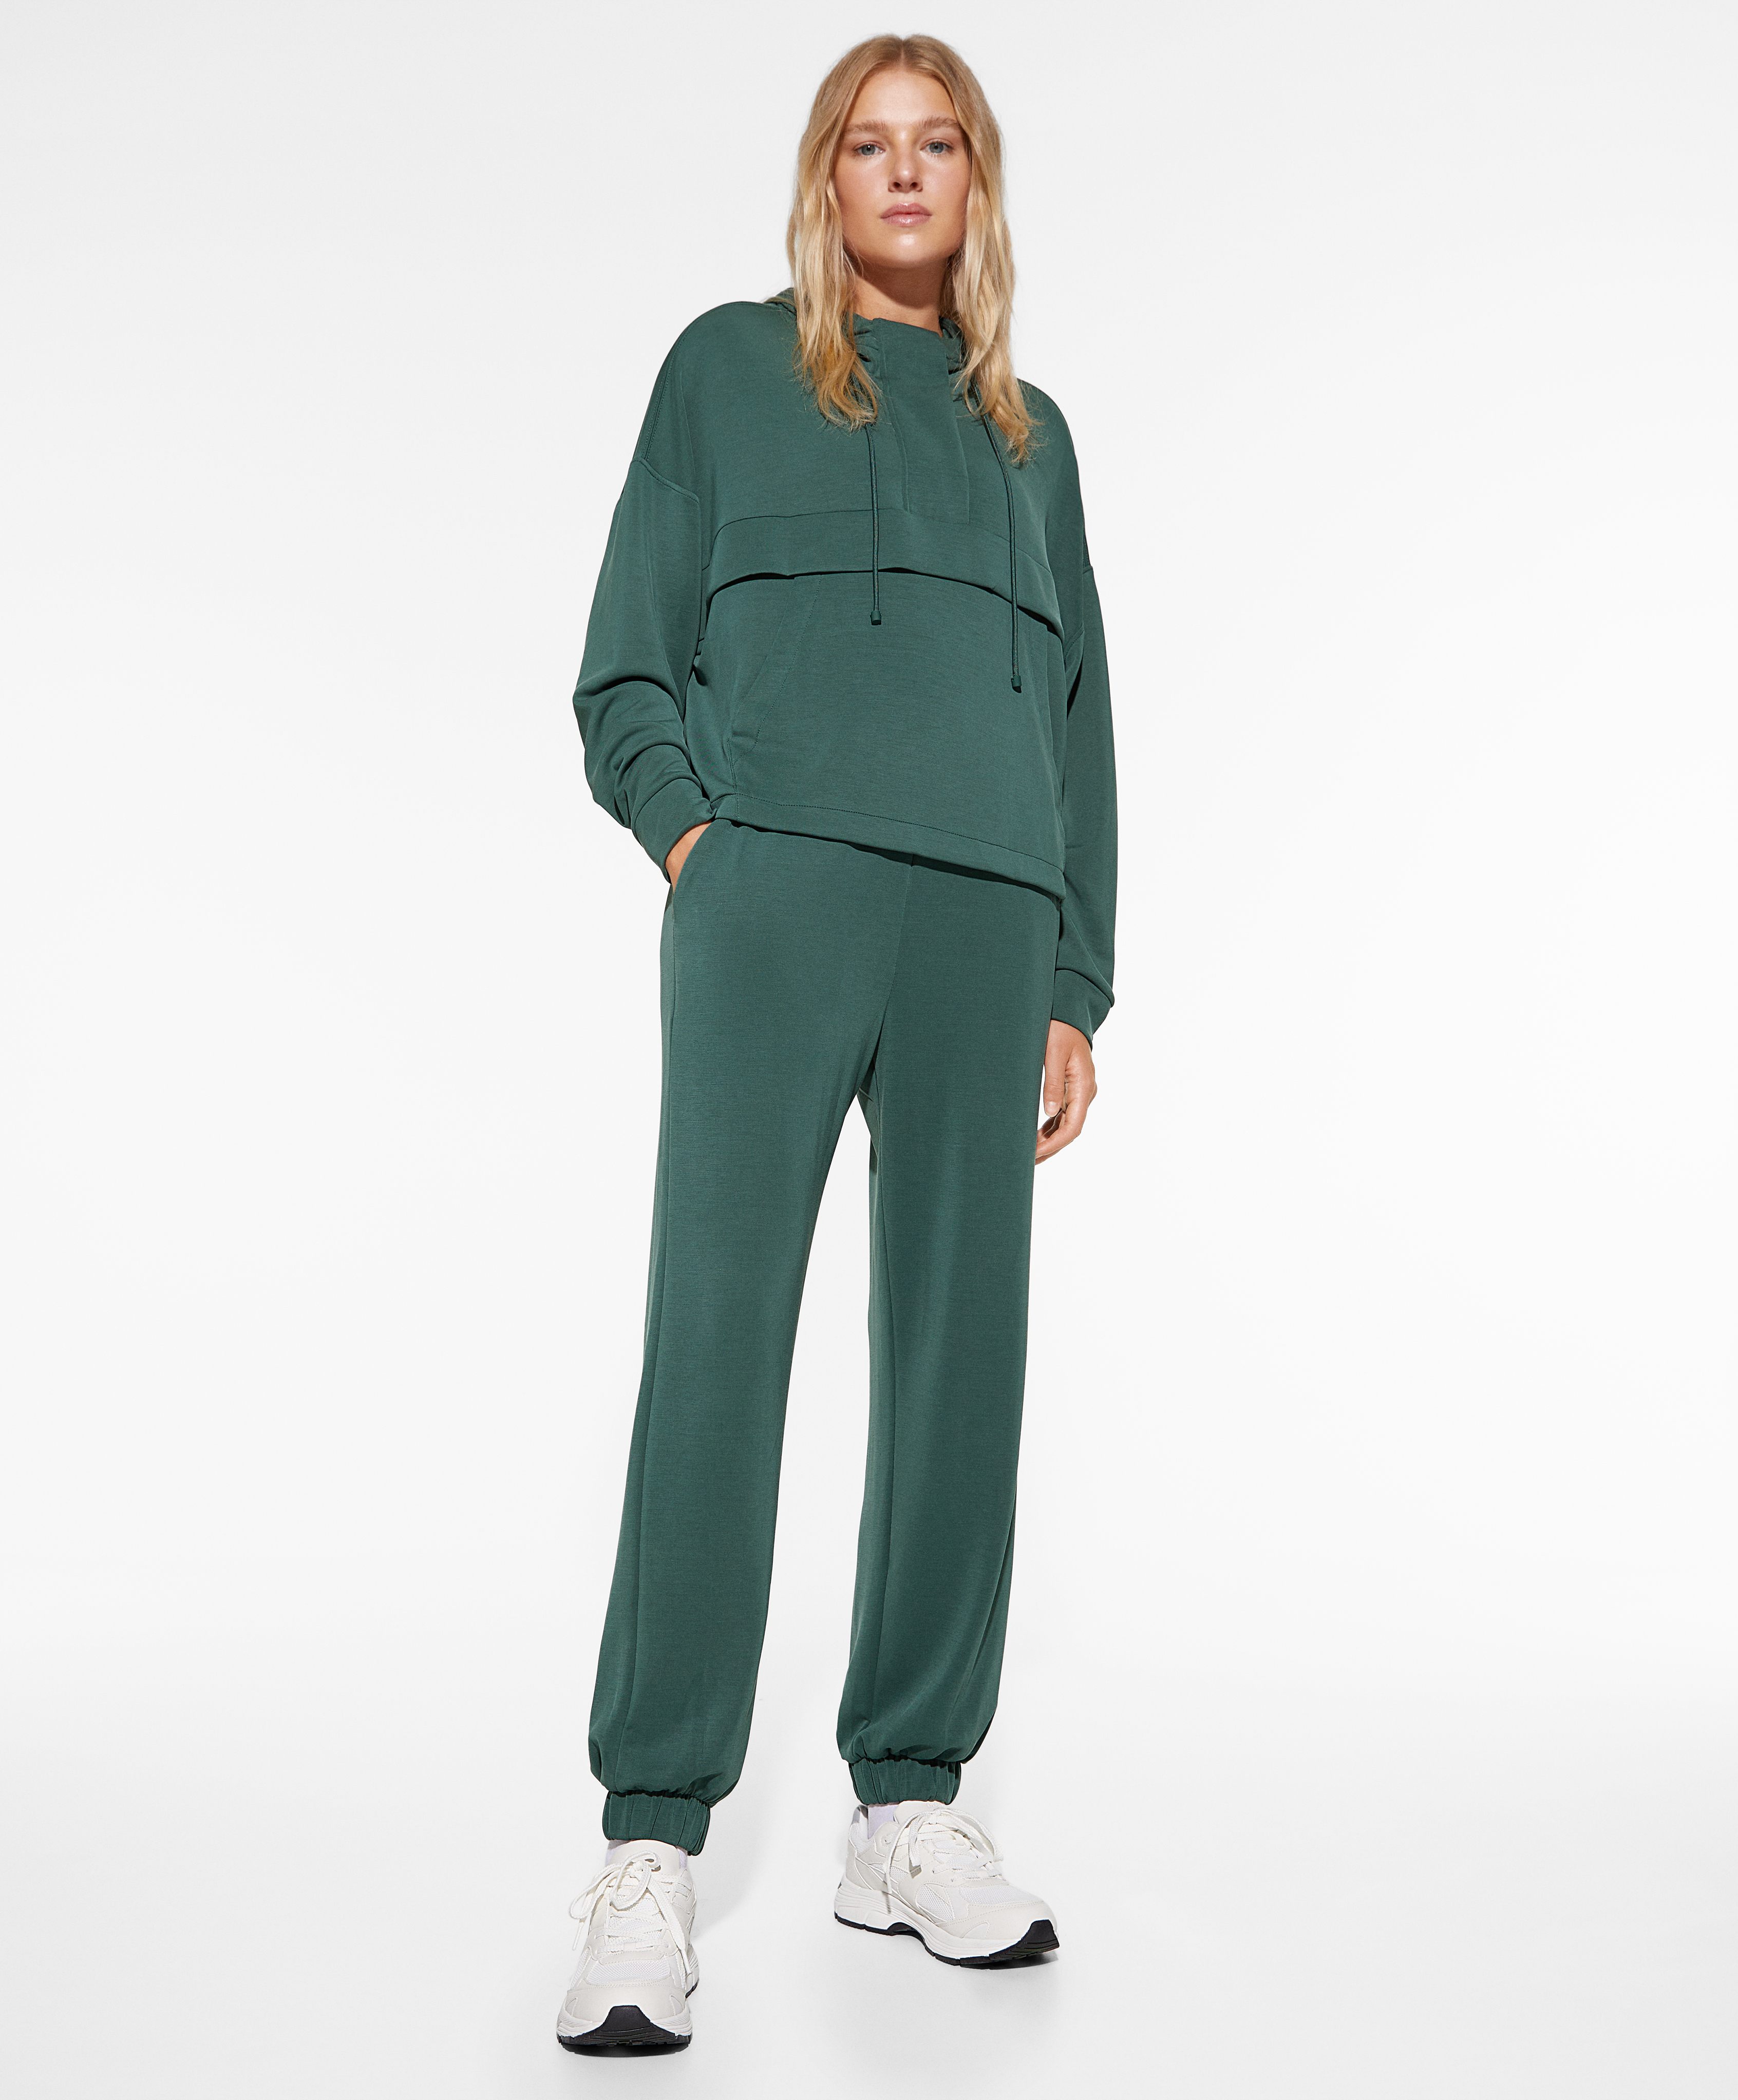 Green jogger tracksuit with modal